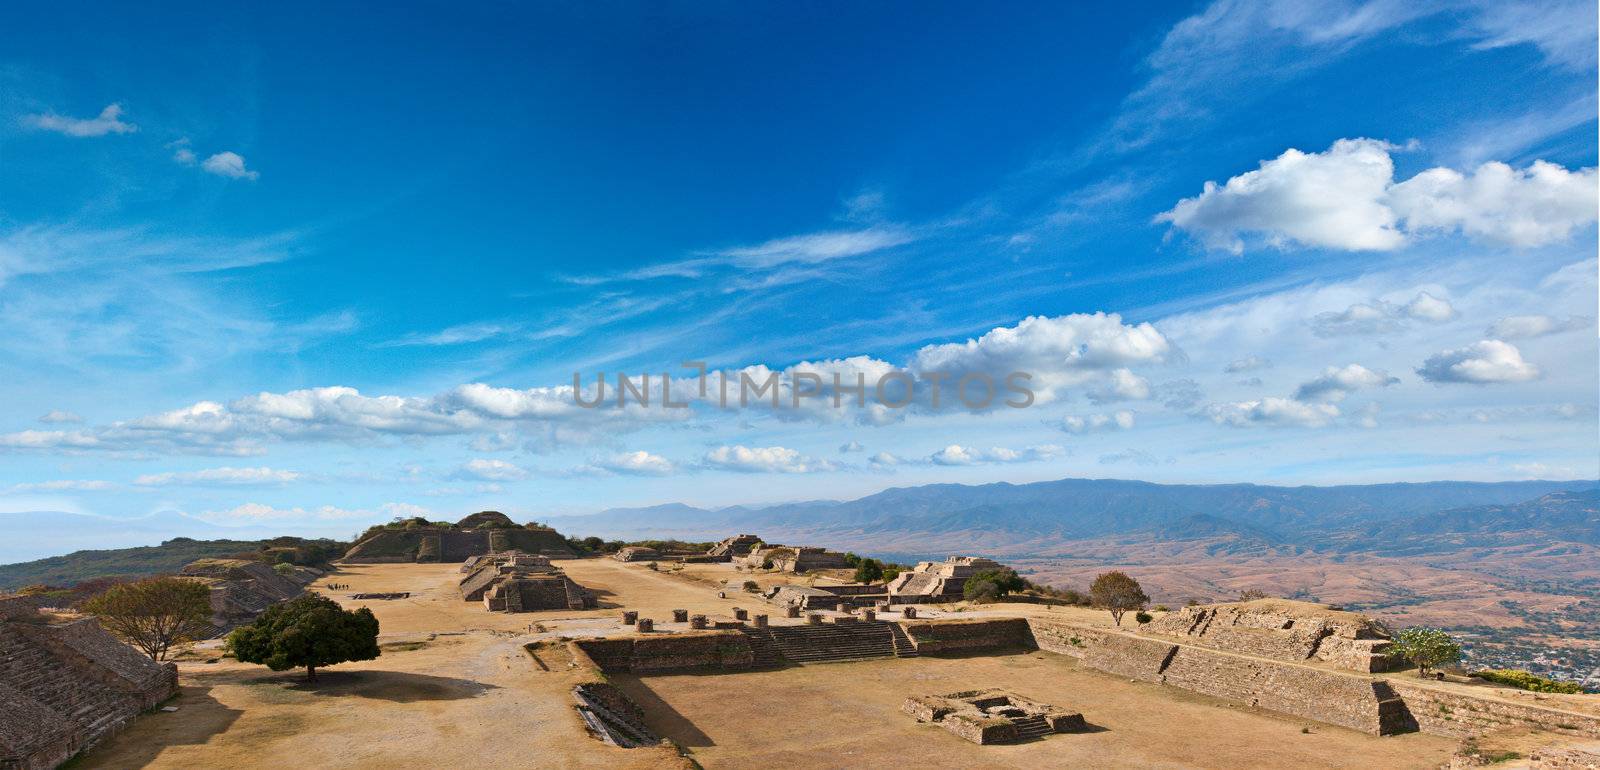 Panorama of sacred site Monte Alban, Mexico  by dimol